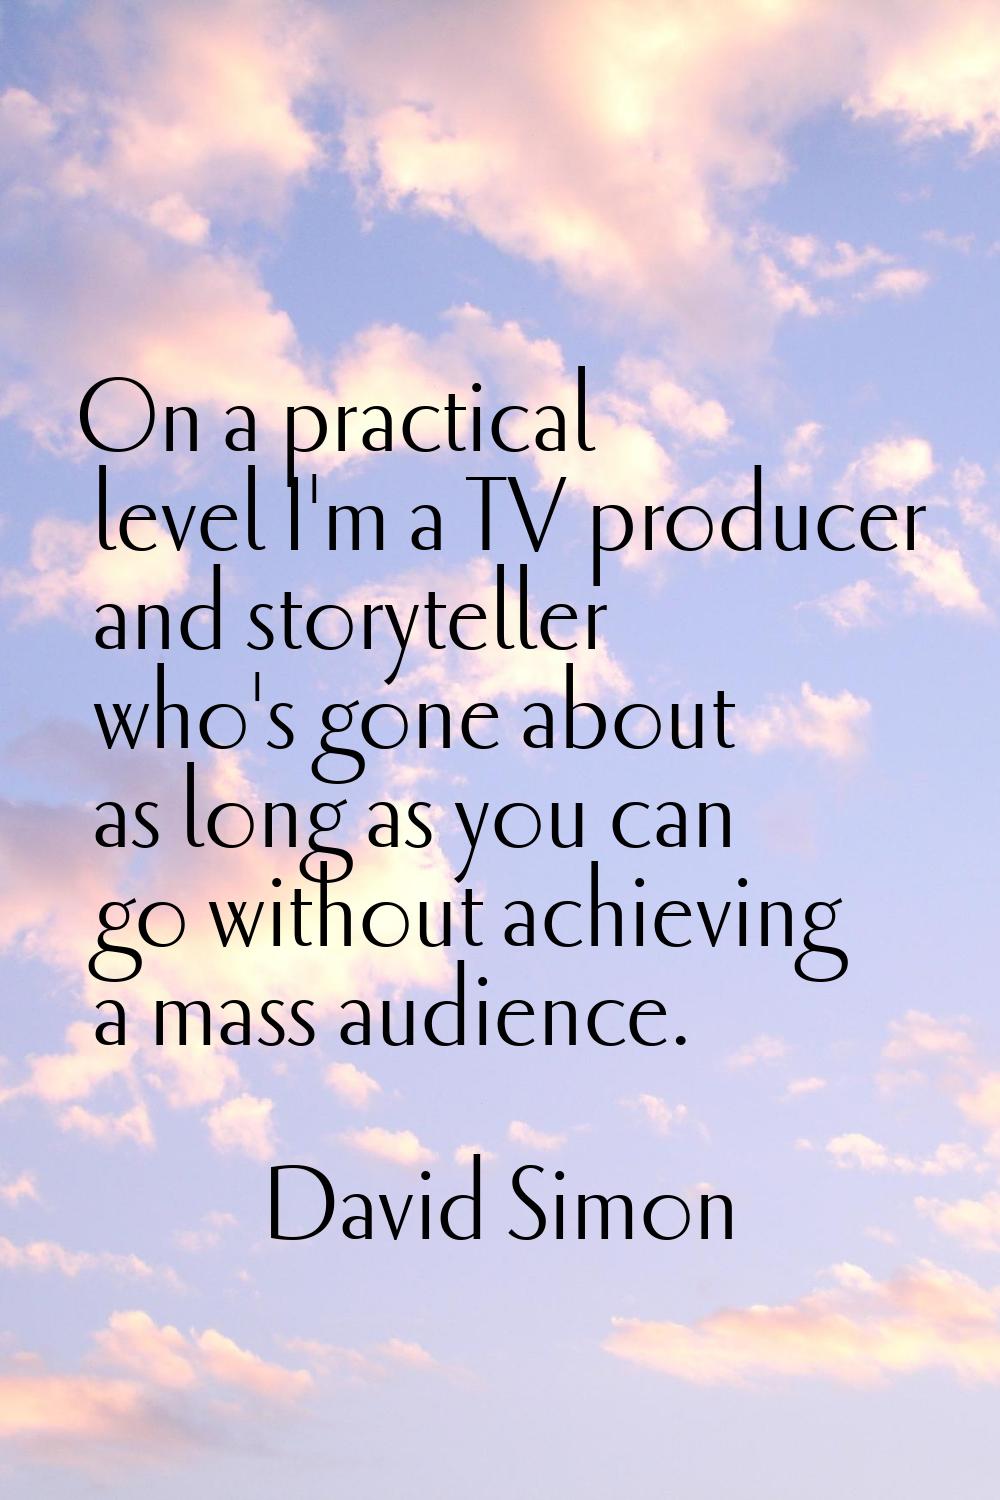 On a practical level I'm a TV producer and storyteller who's gone about as long as you can go witho